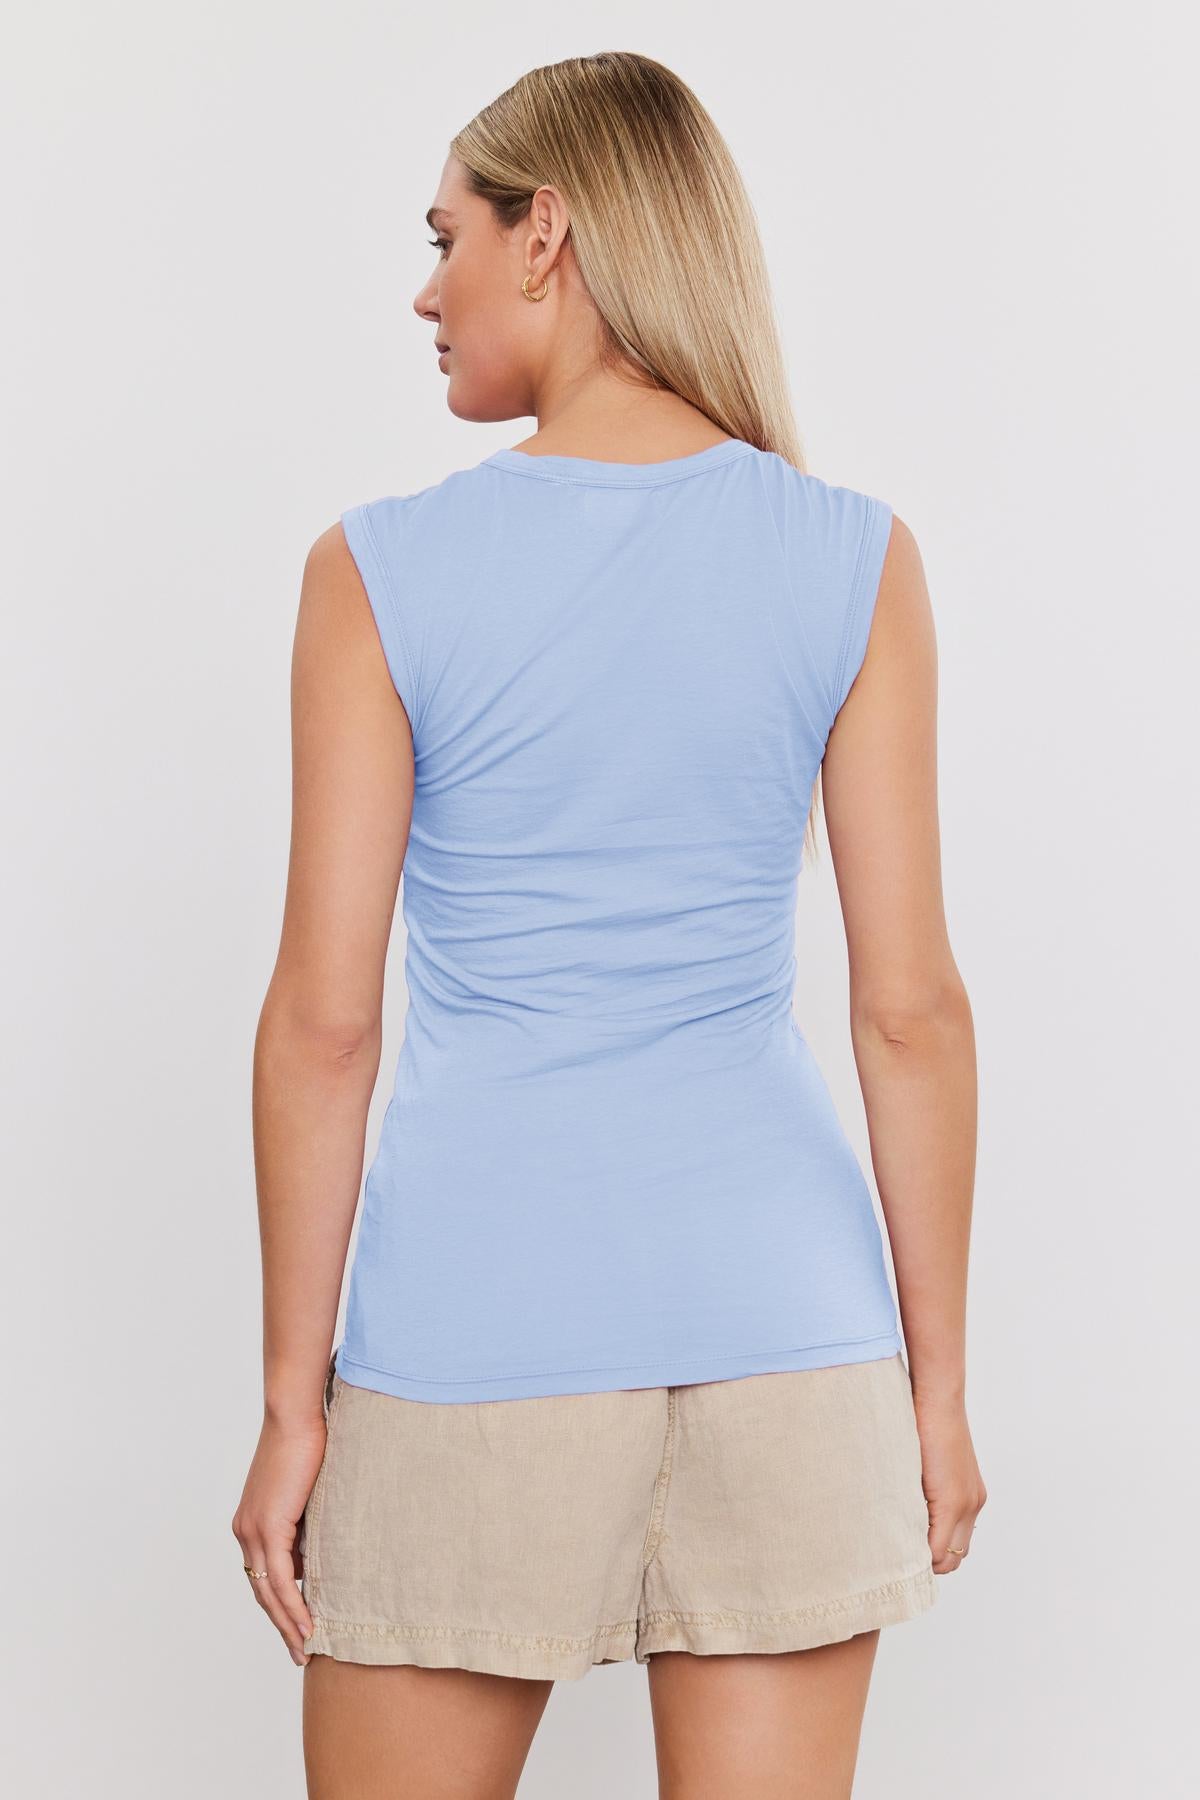 A person with long blonde hair is seen from the back, wearing a light blue Velvet by Graham & Spencer ESTINA TANK TOP and beige shorts.-36752924180673